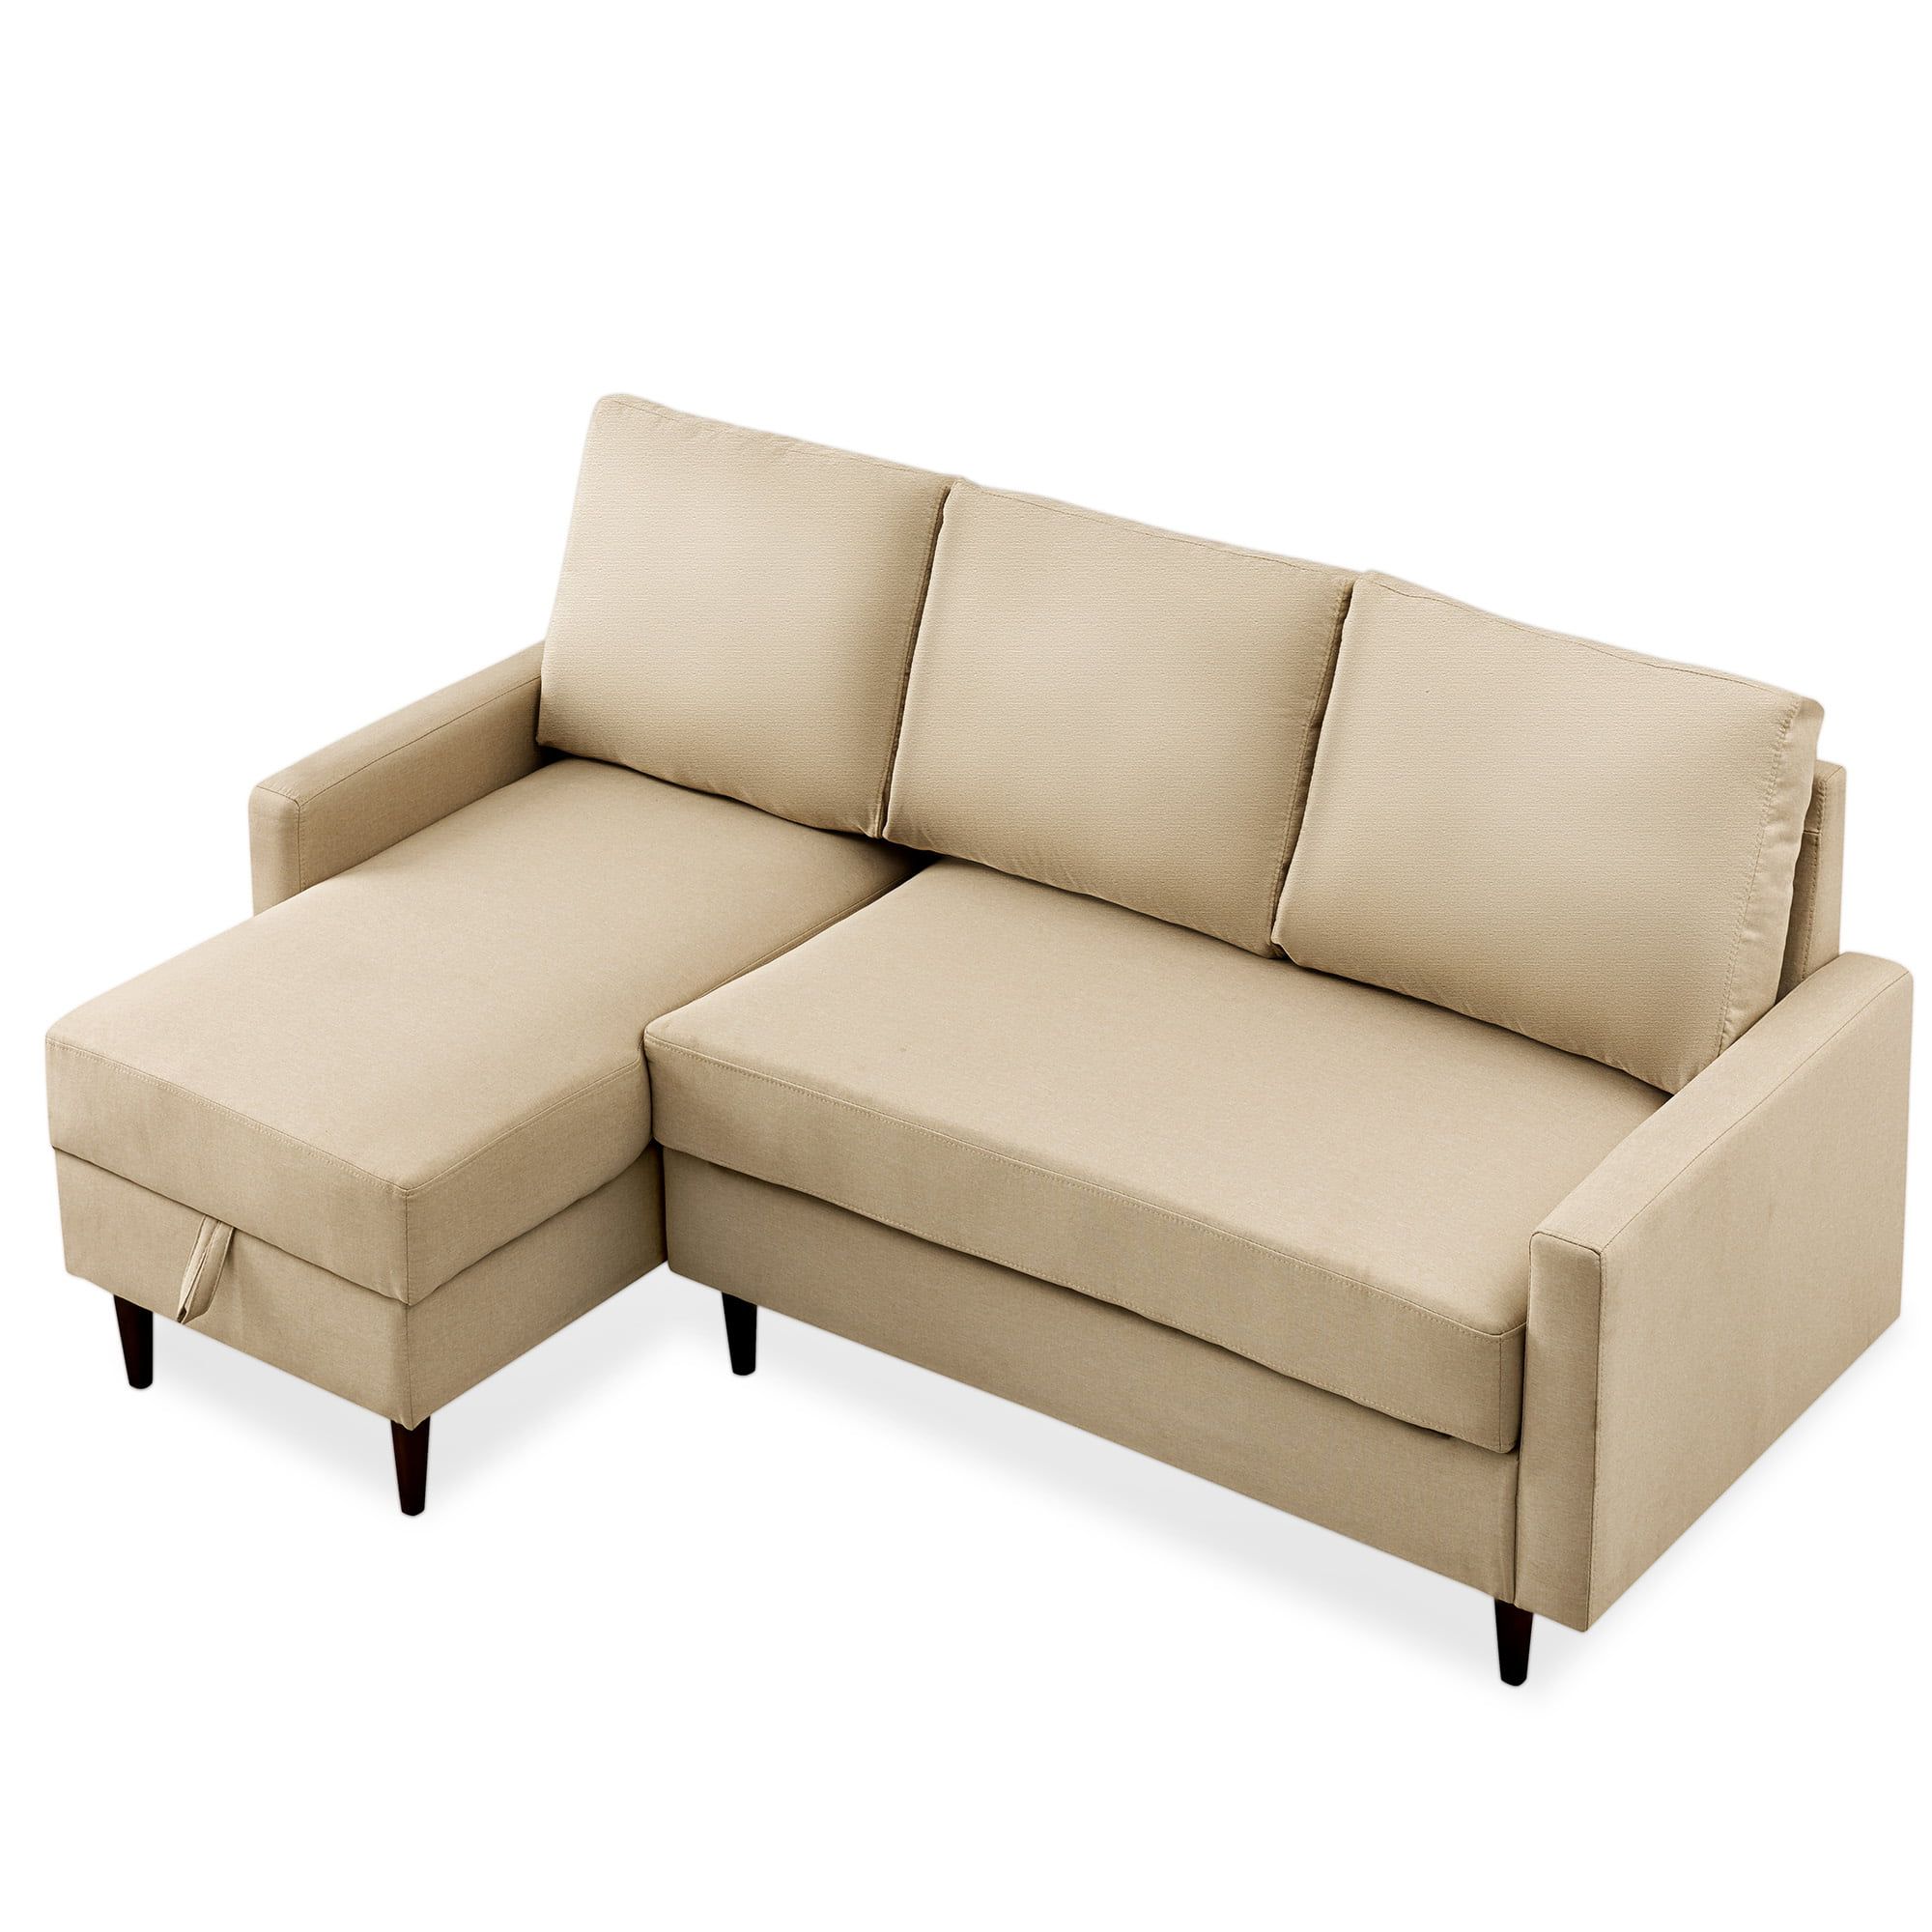 Beige Mid Century Pull Out Sleeper Sectional Sofa With Reversible For Trendy Sofas In Beige (View 12 of 15)